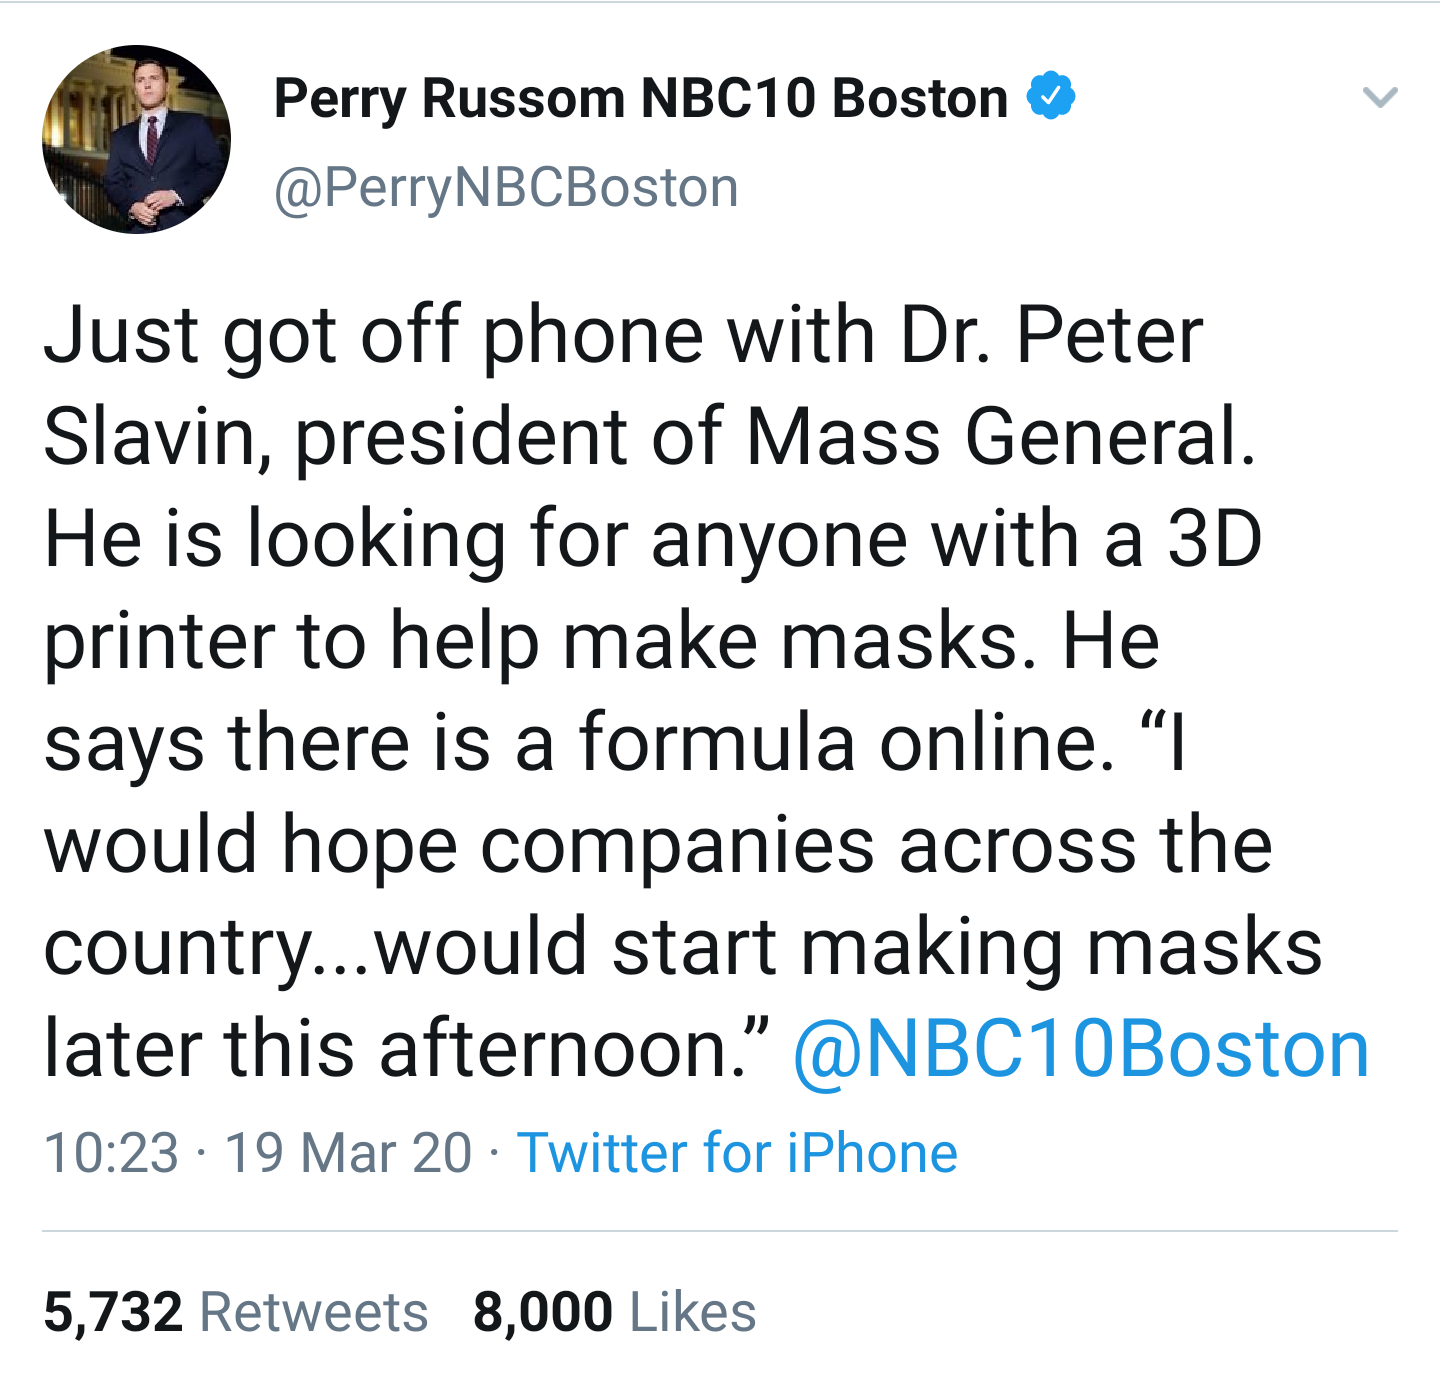 Screencap of a Tweet by Perry Russom, a reporter at NBC 10 Boston. Just got off phone with Dr. Peter Slavin, president of Mass General. He is looking for anyone with a 3D printer to help make masks. He says there is a formula online. 